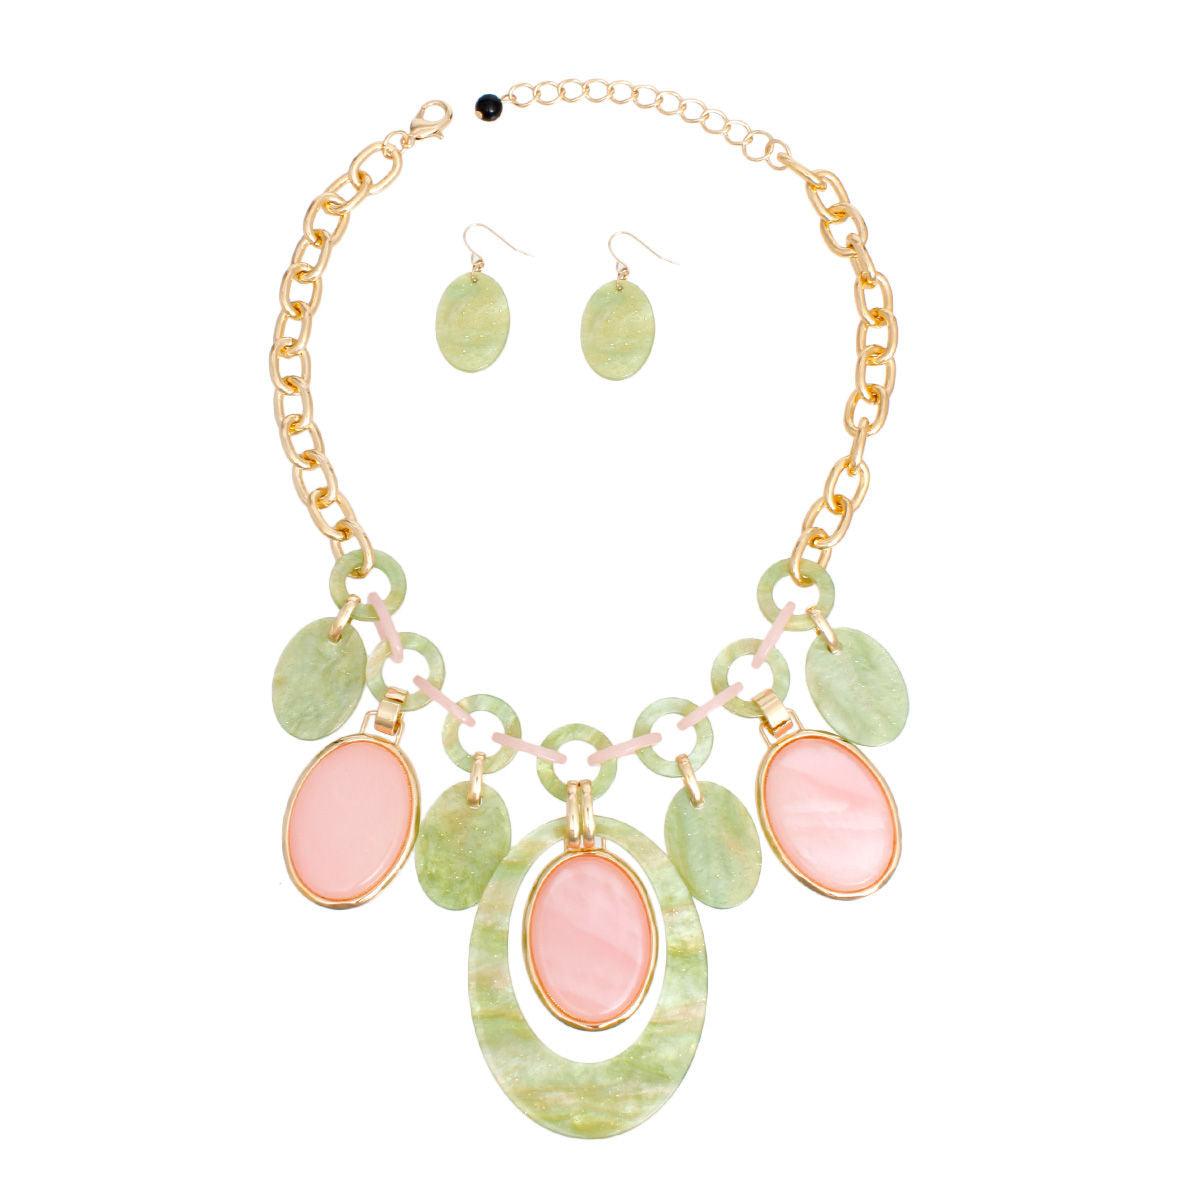 Pink Green Oval Charms Necklace Set - Artisanal Fashion Jewelry